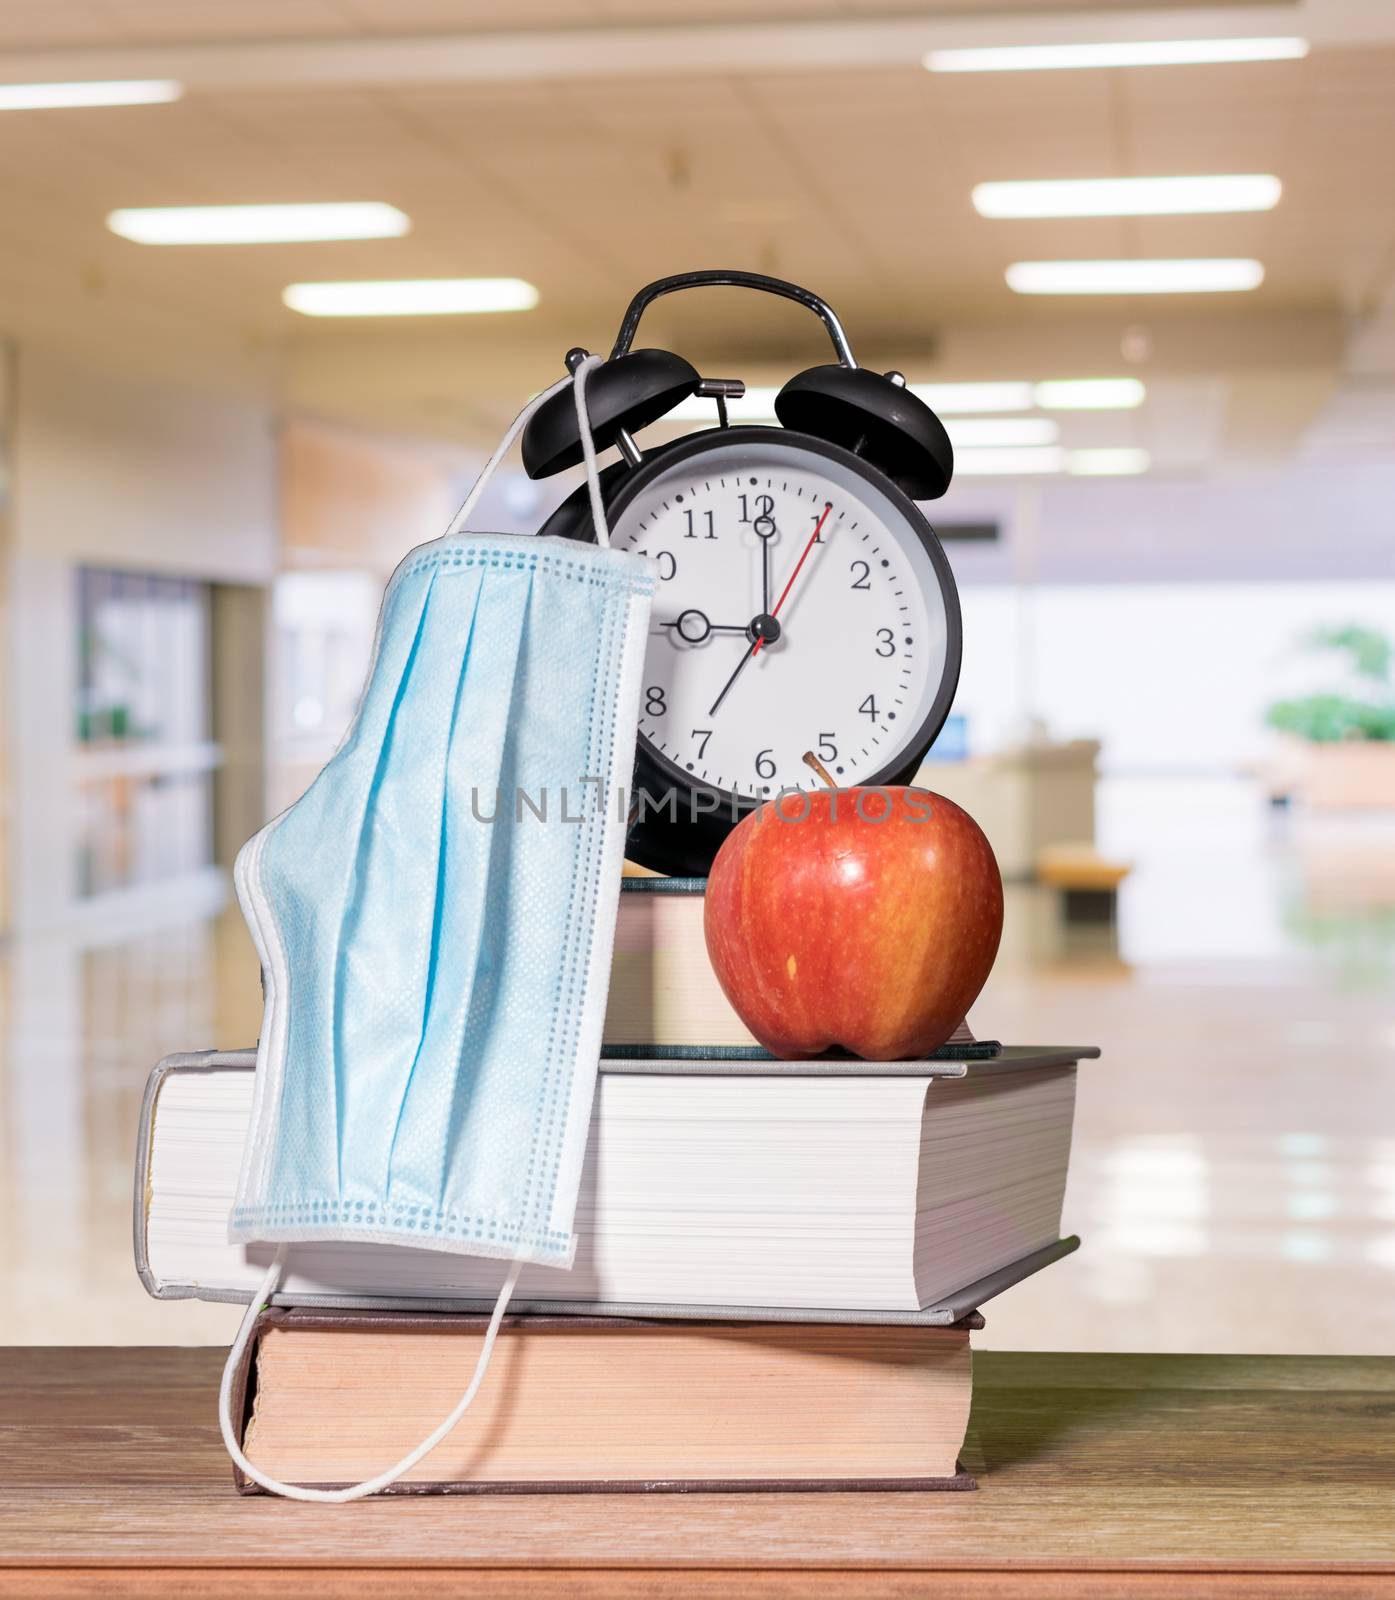 Back to school background concept with stack of books, alarm clock, apple with face mask by steheap